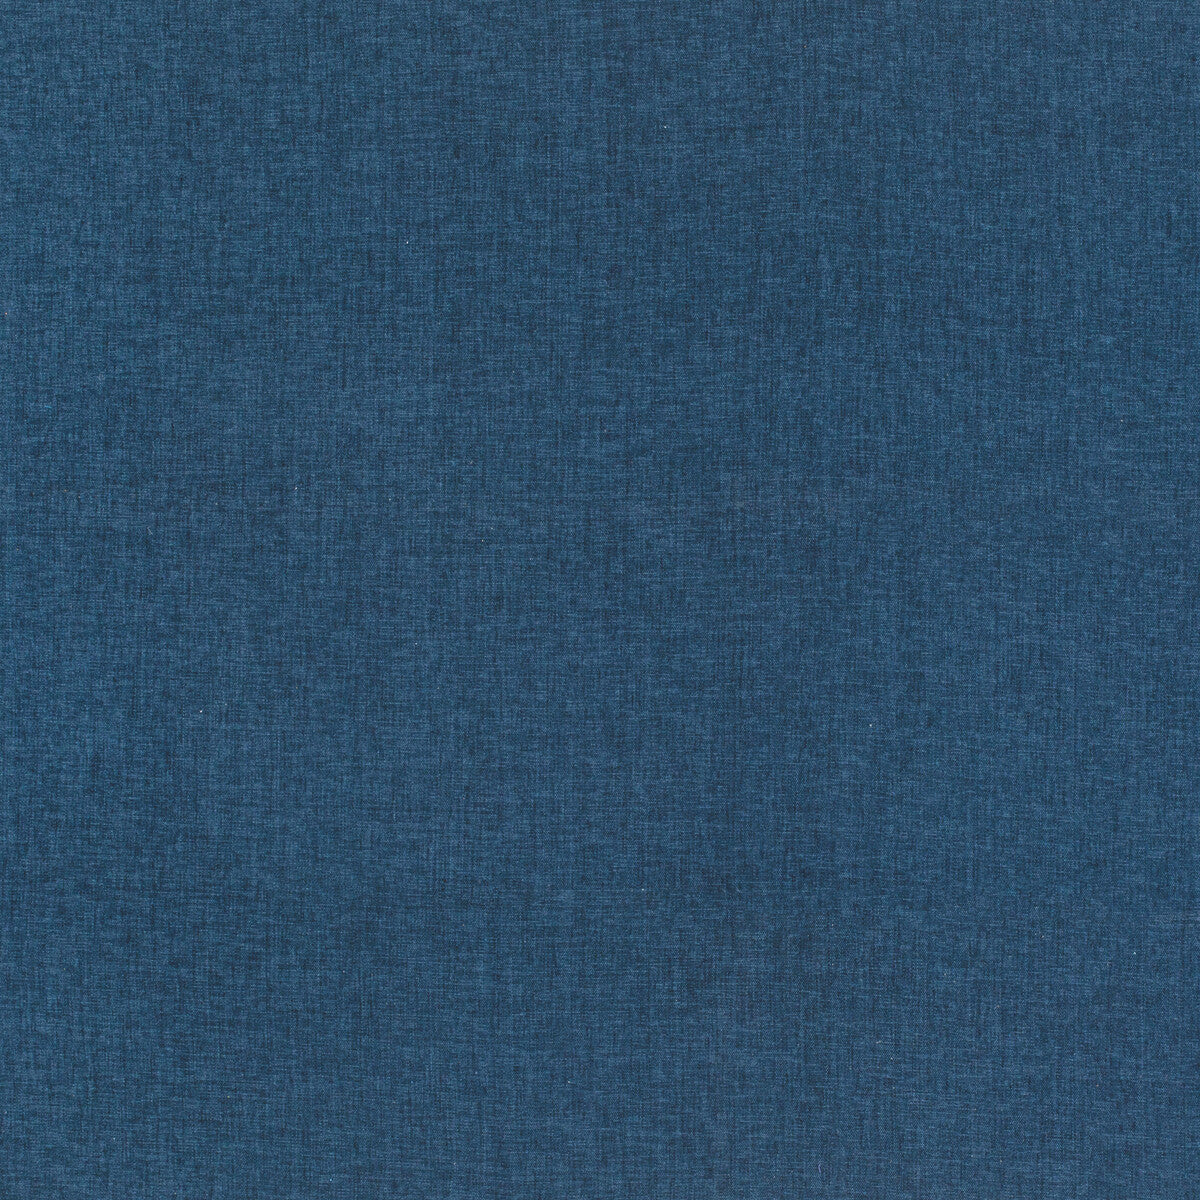 Kravet Smart fabric in 36095-155 color - pattern 36095.155.0 - by Kravet Smart in the Eco-Friendly Chenille collection